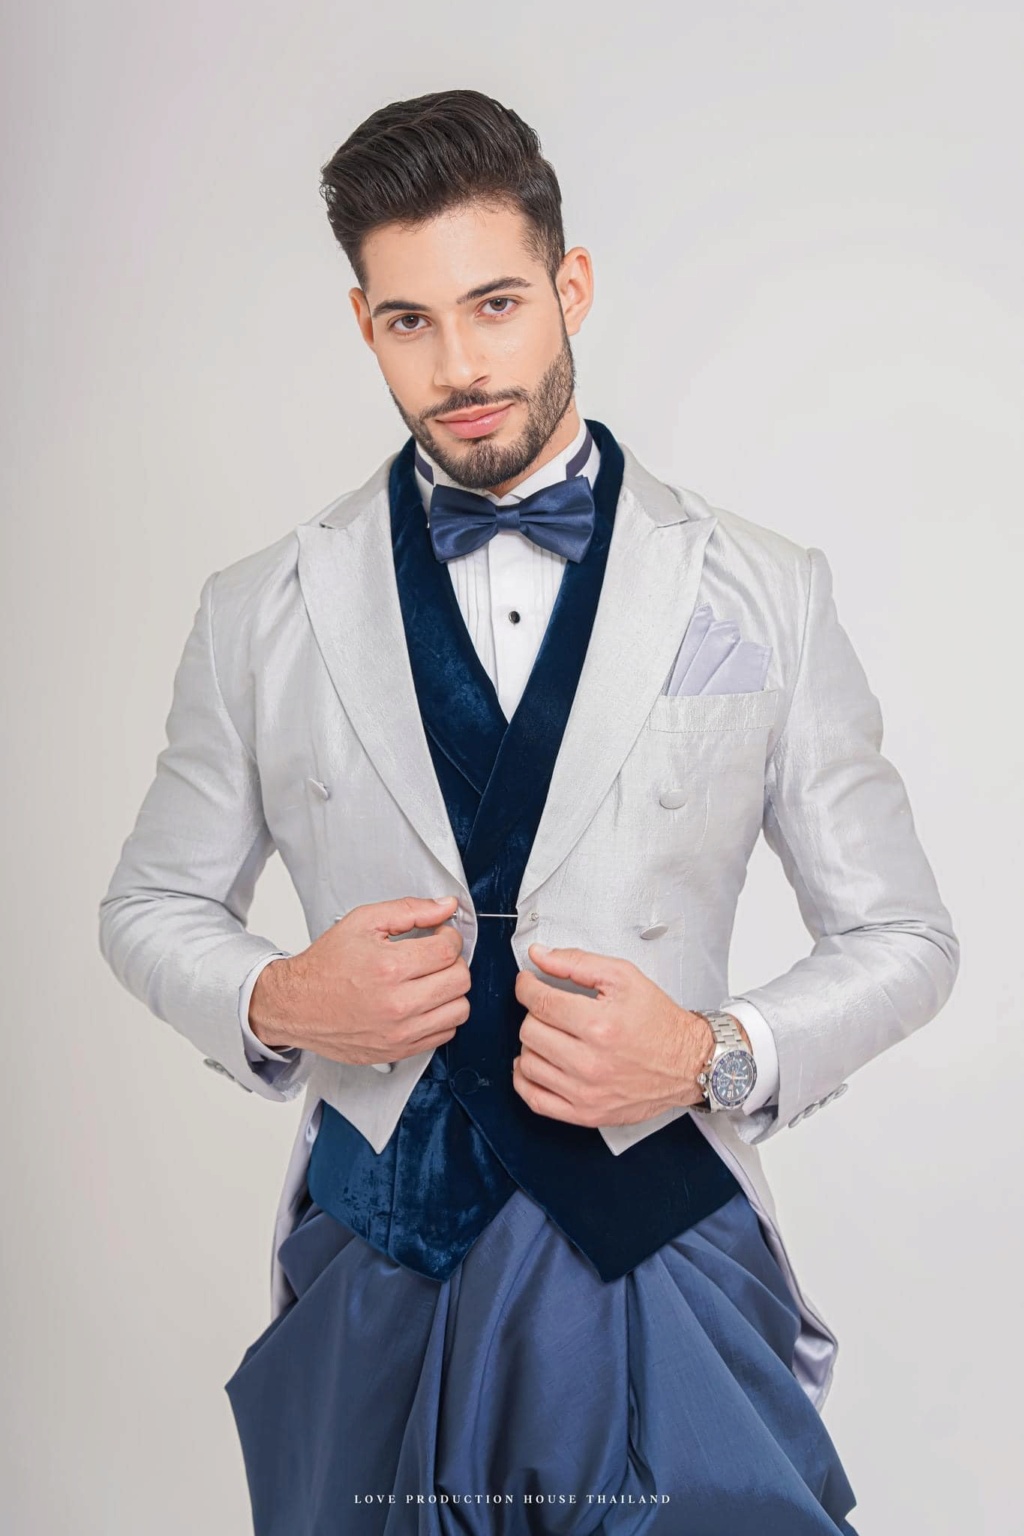 Manuel Franco - MISTER INTERNATIONAL 2022 - Official Thread (DOMINICAN REPUBLIC) Thai Version - Page 3 34119210